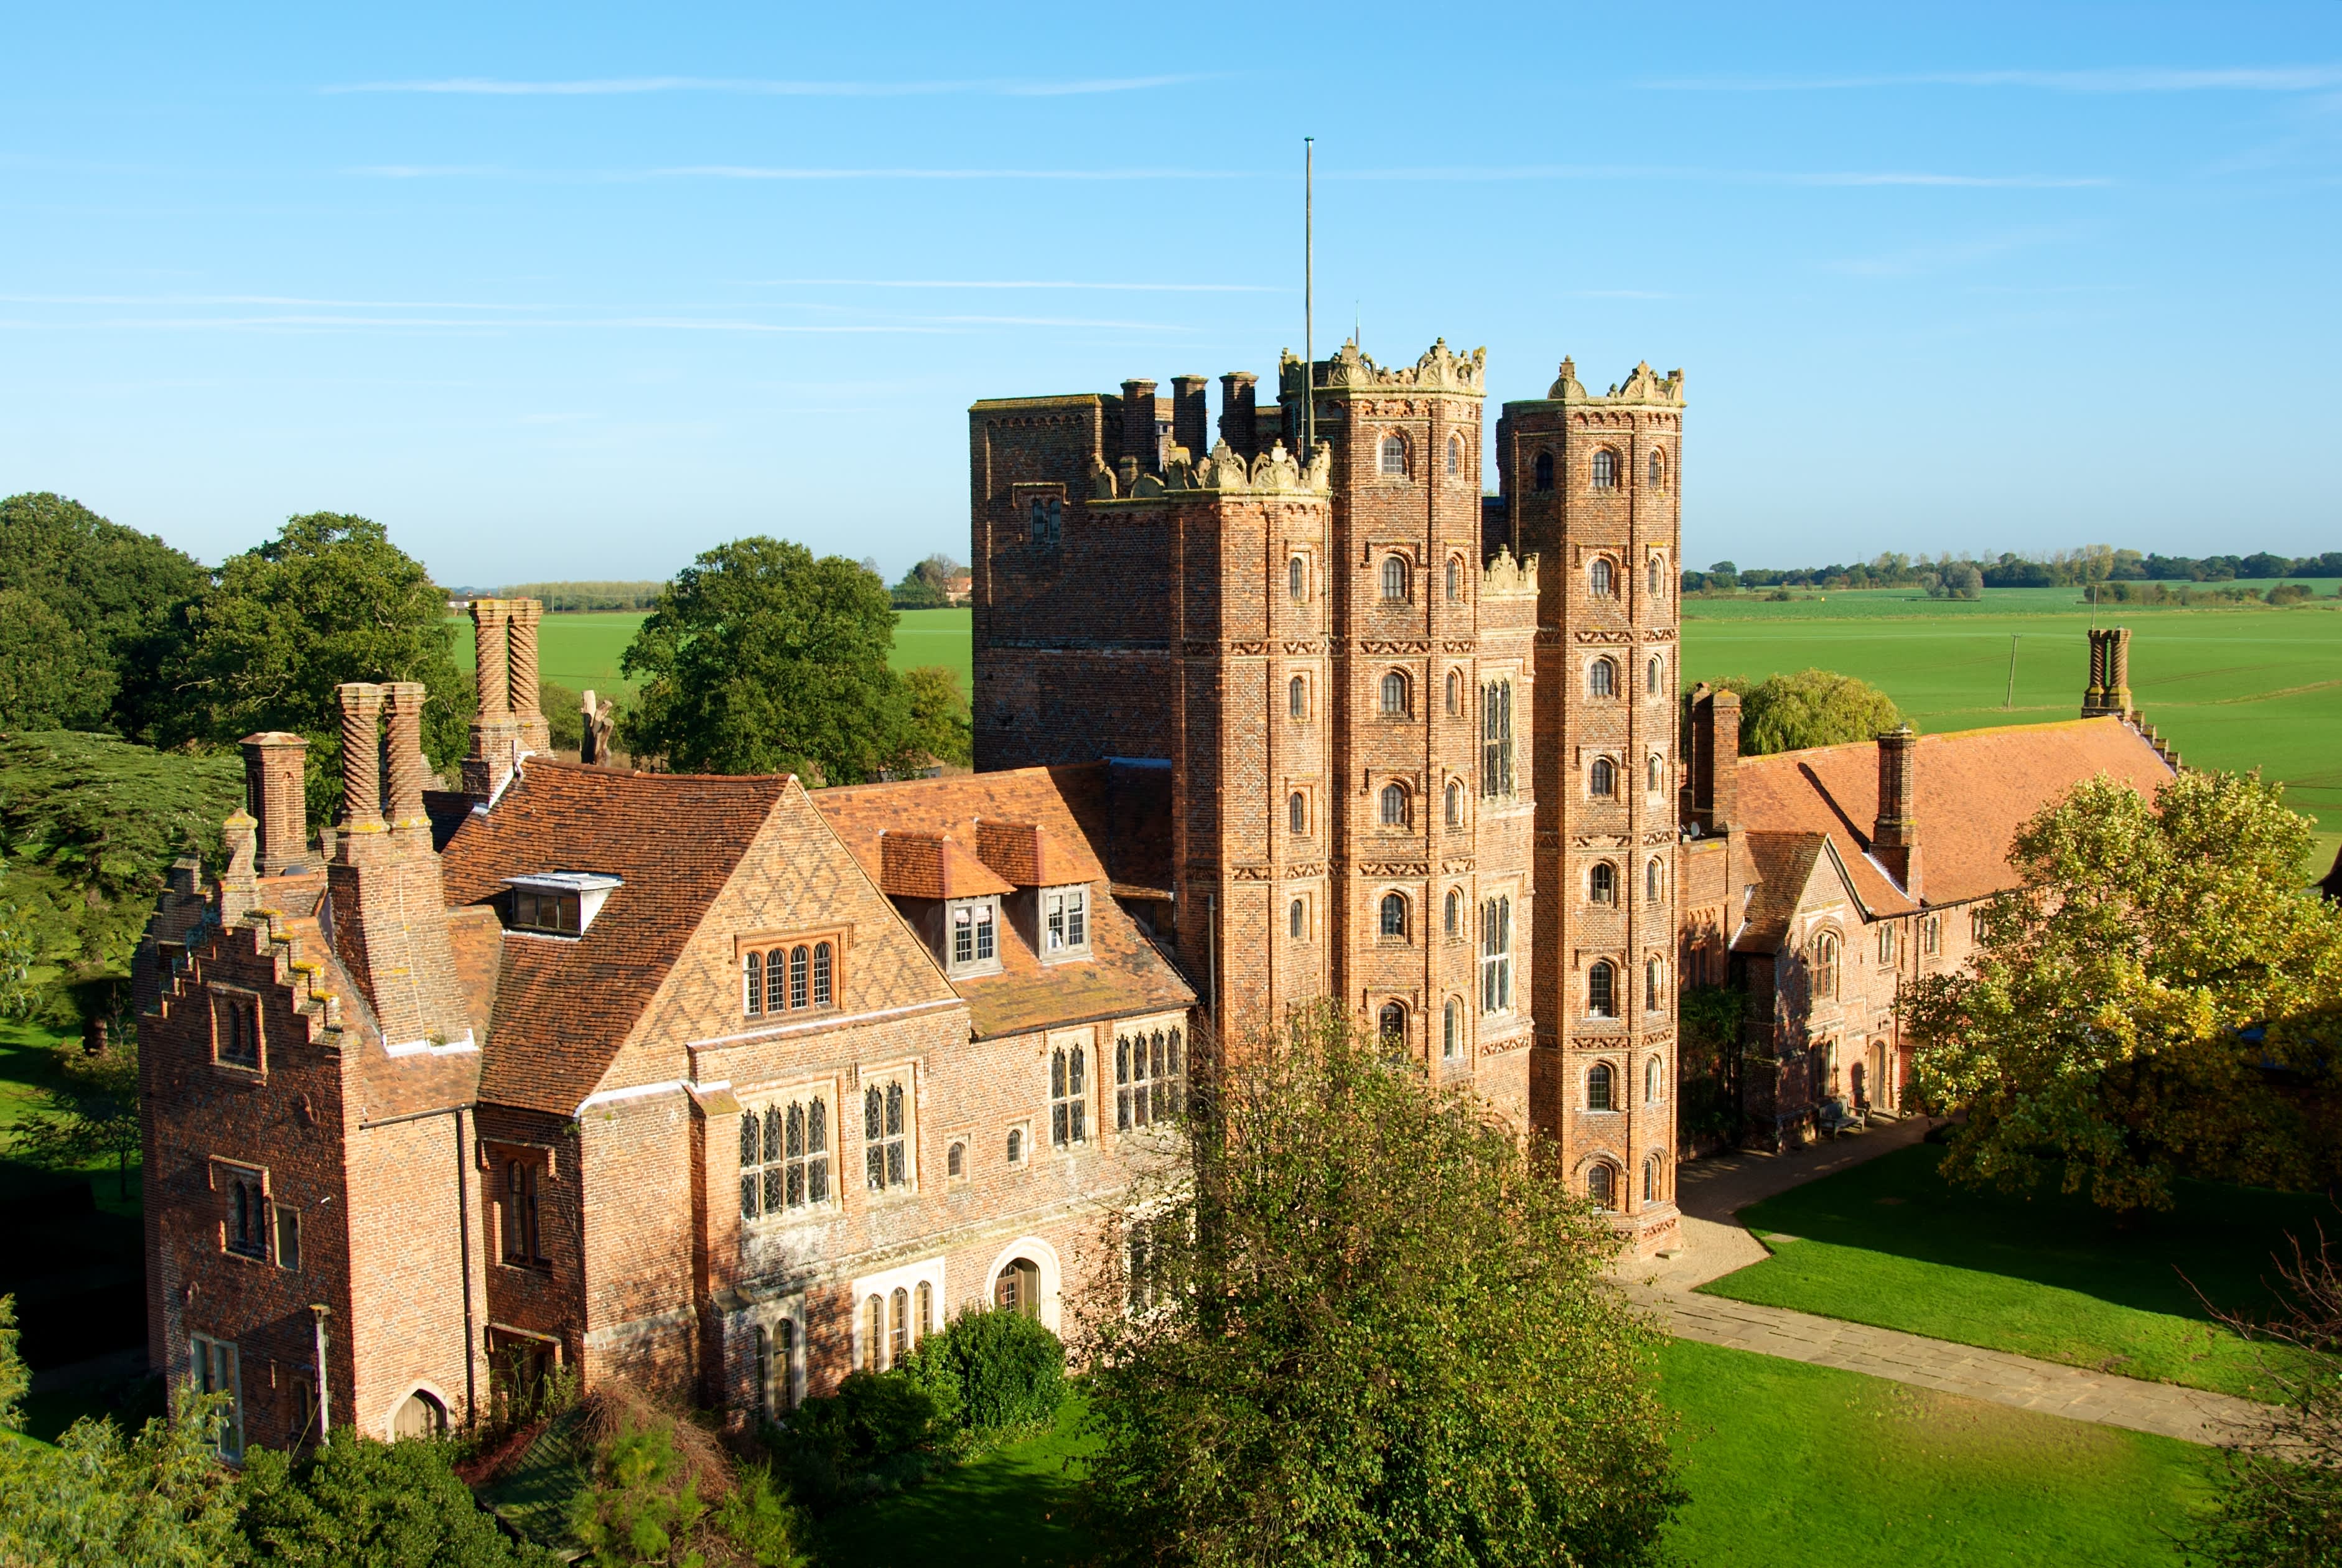 An impressive Tudor Tower, at least 8 stories high, nestles in verdant English countryside.